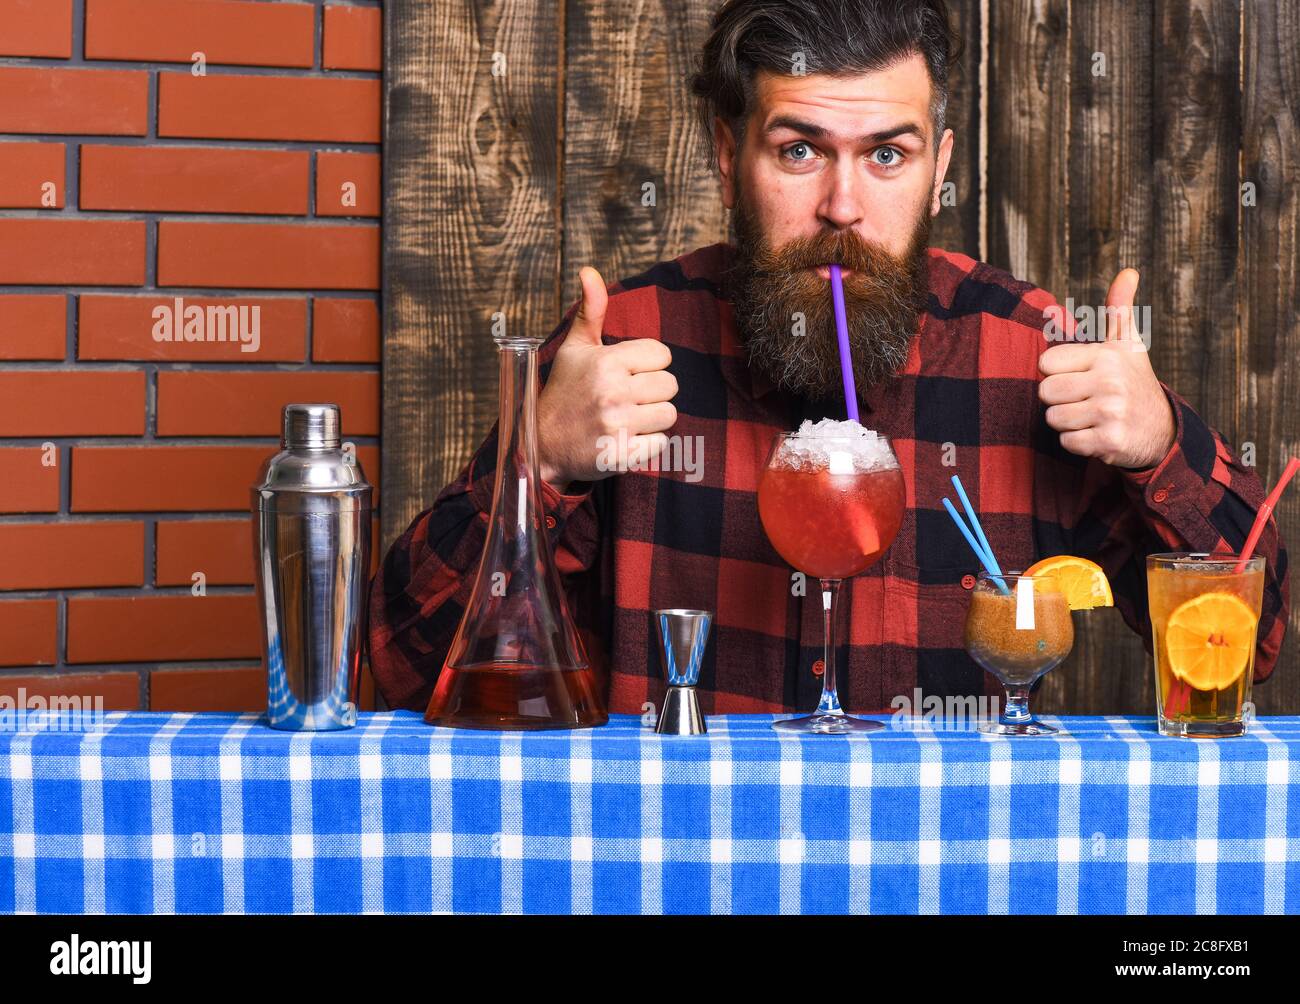 Barman with beard and cheerful face drinks out of glass with drinking straw cocktail. Man in checkered shirt on wooden background. Barman and cocktails concept. Hipster enjoy drink and thumbs up. Stock Photo